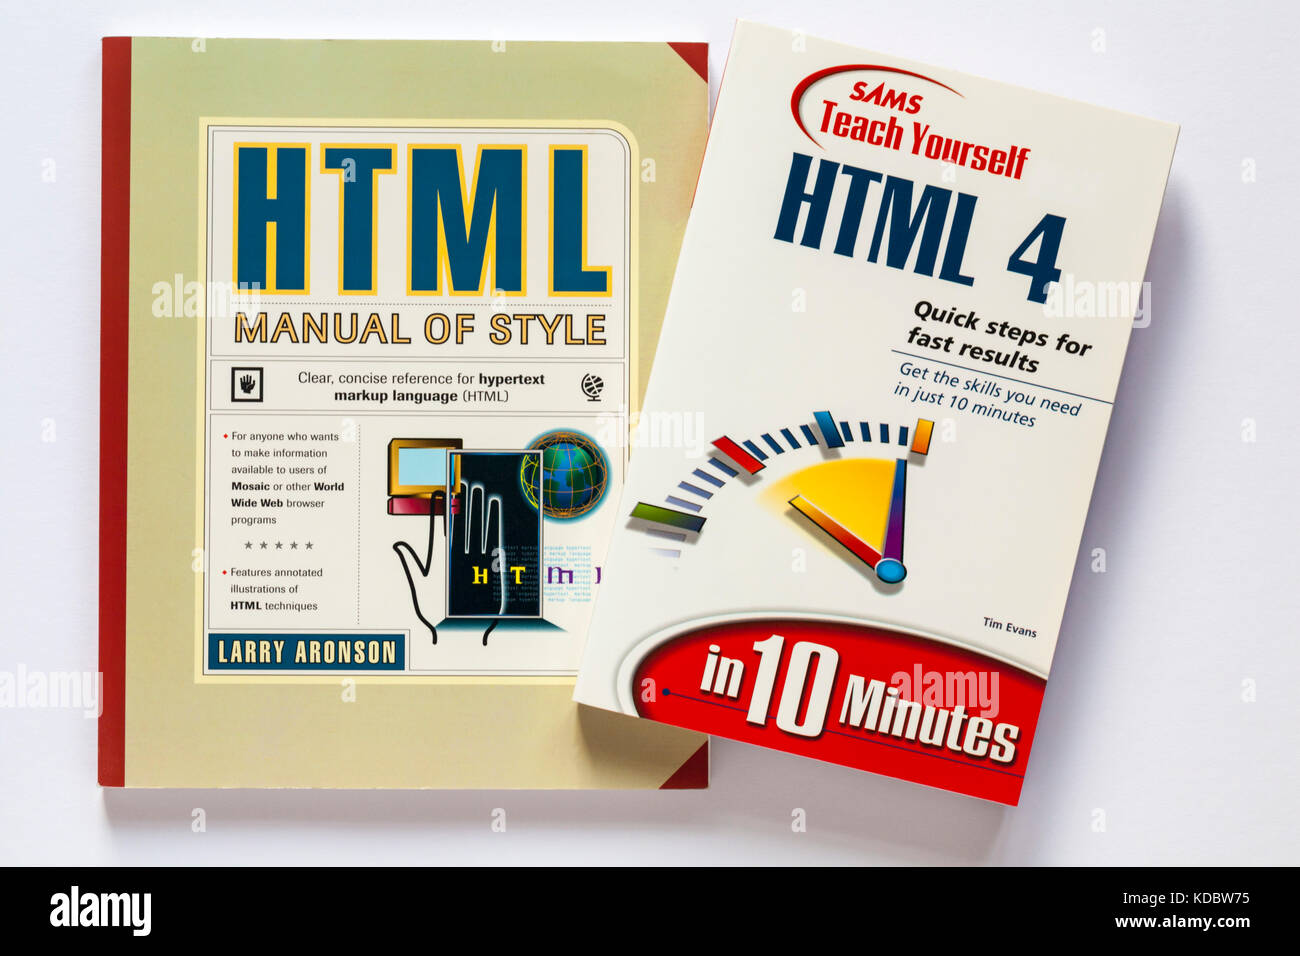 HTML Manual of Style book and SAMS teach yourself  HTML 4 book, books on hypertext markup language on white background Stock Photo